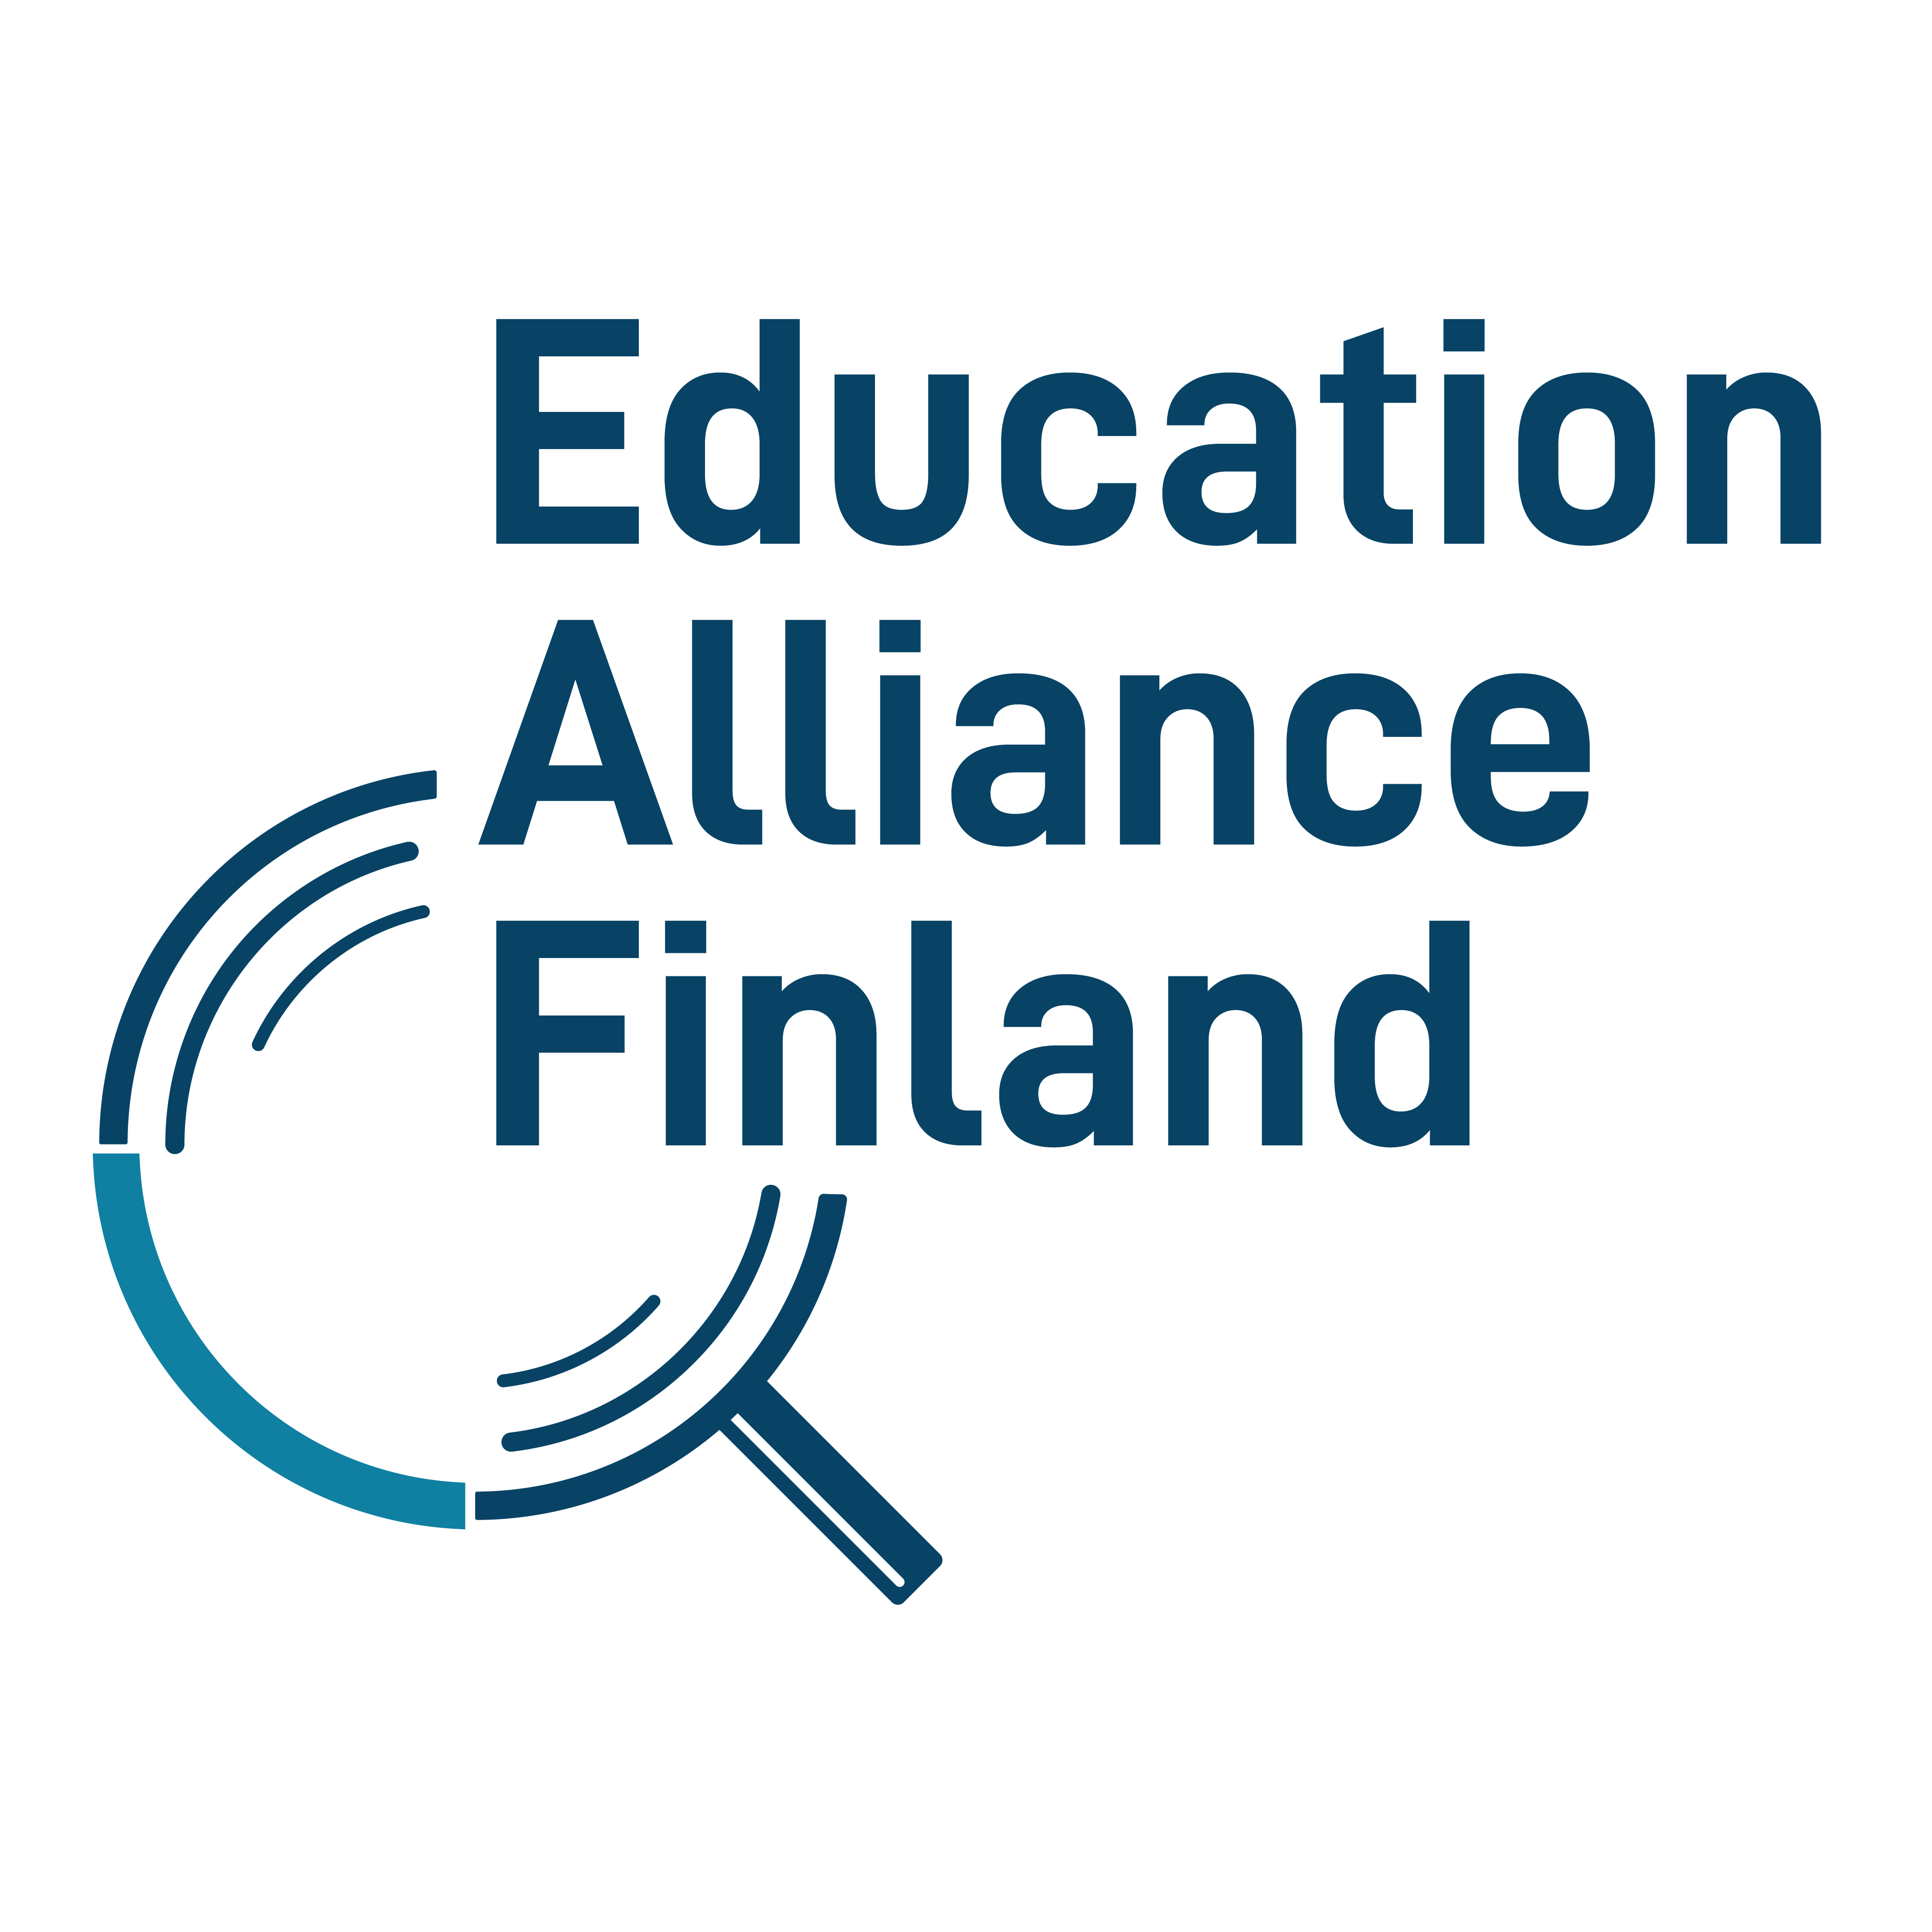 Education Alliance Finland EdTech Quality Certification